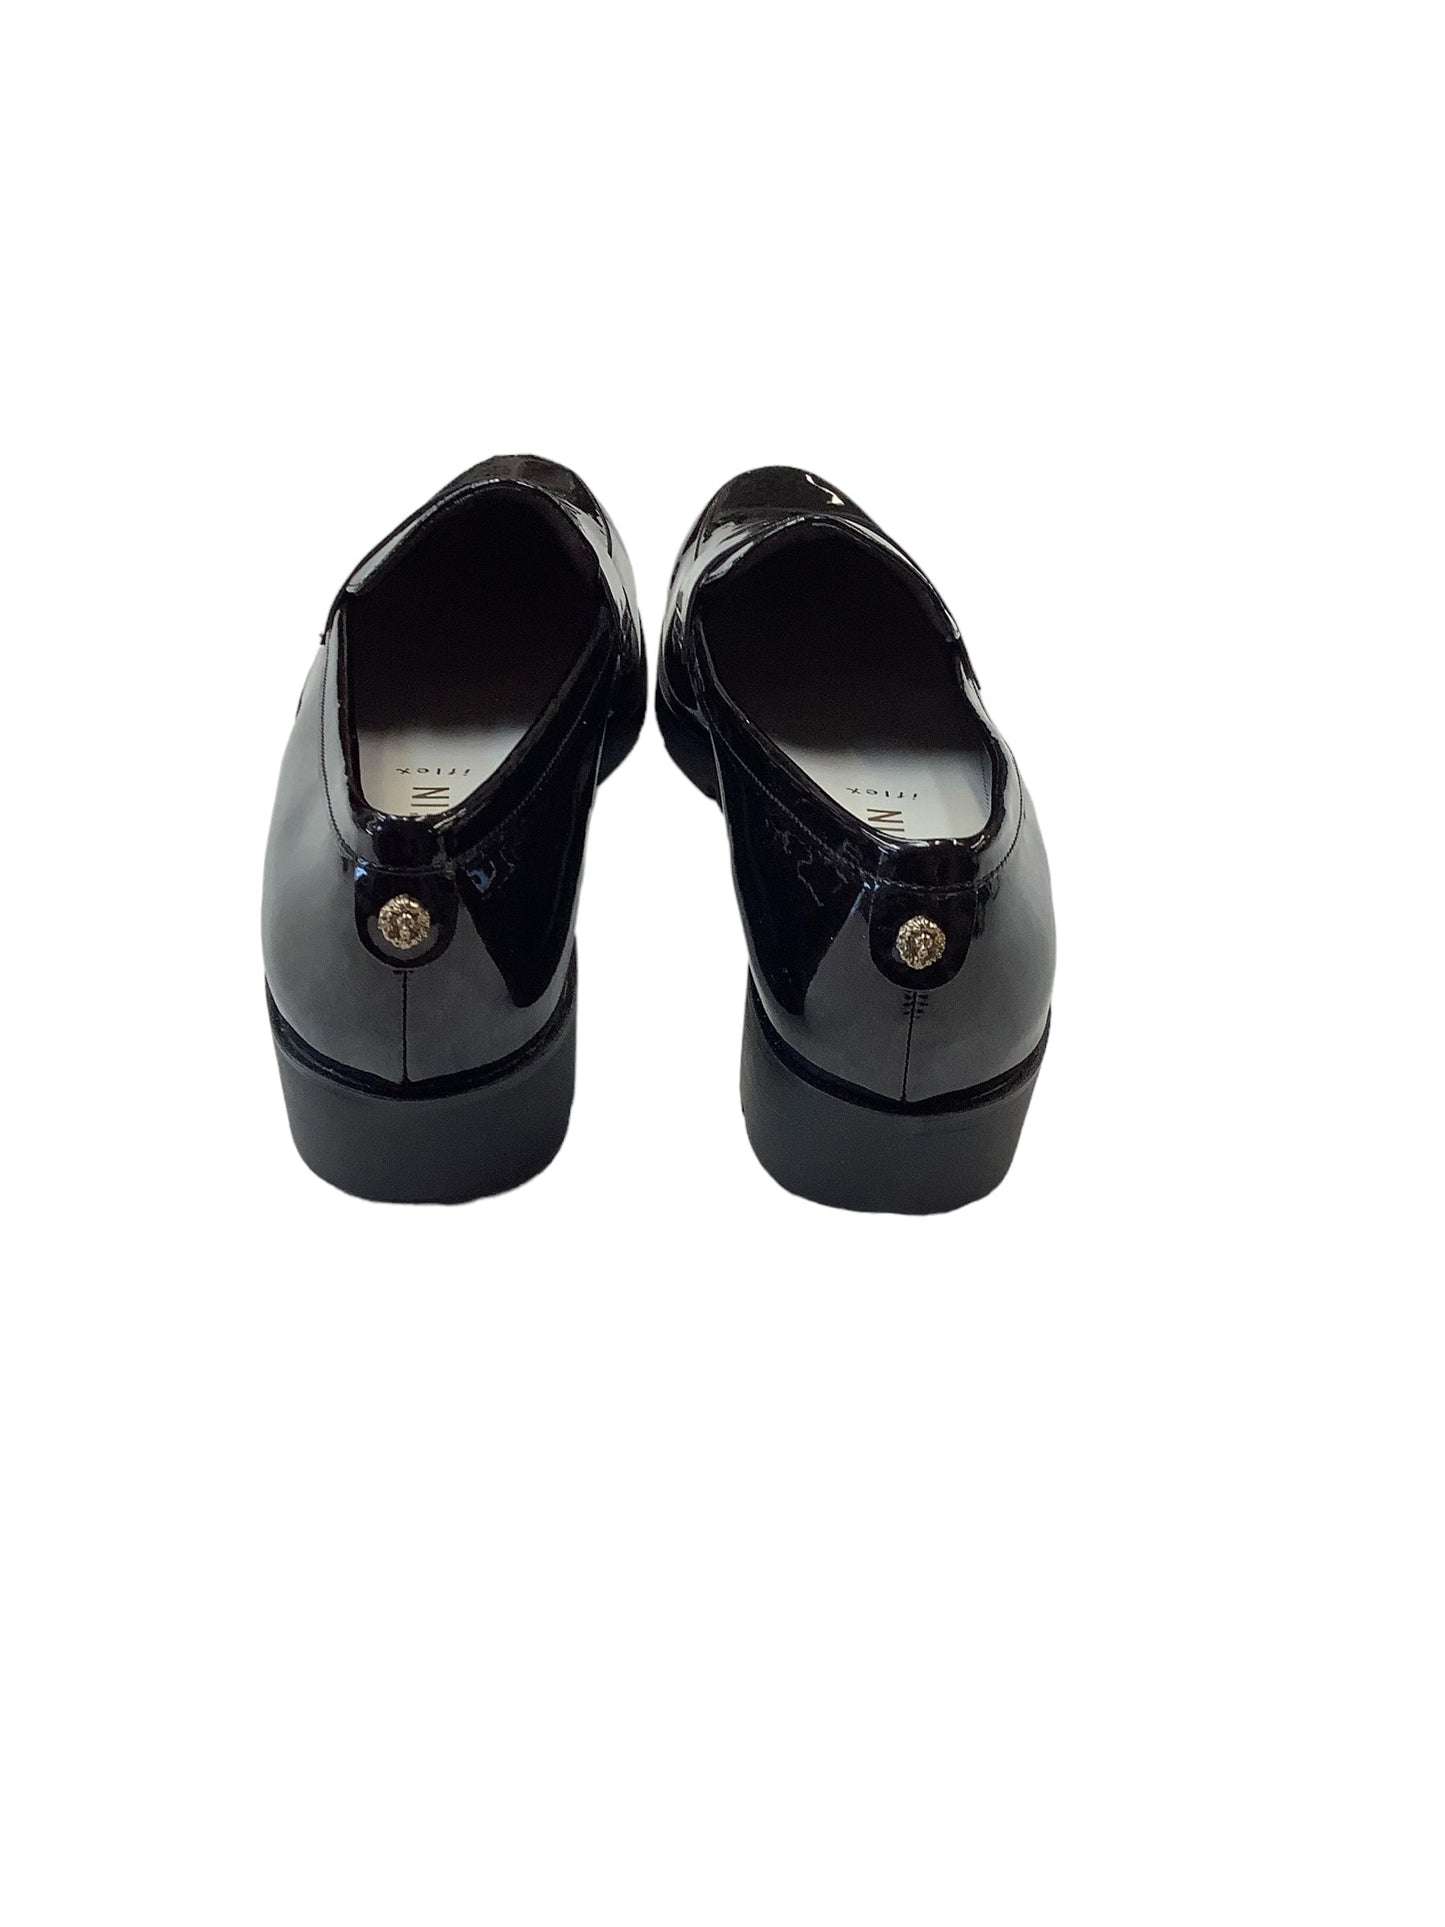 Shoes Flats Loafer Oxford By Anne Klein  Size: 12